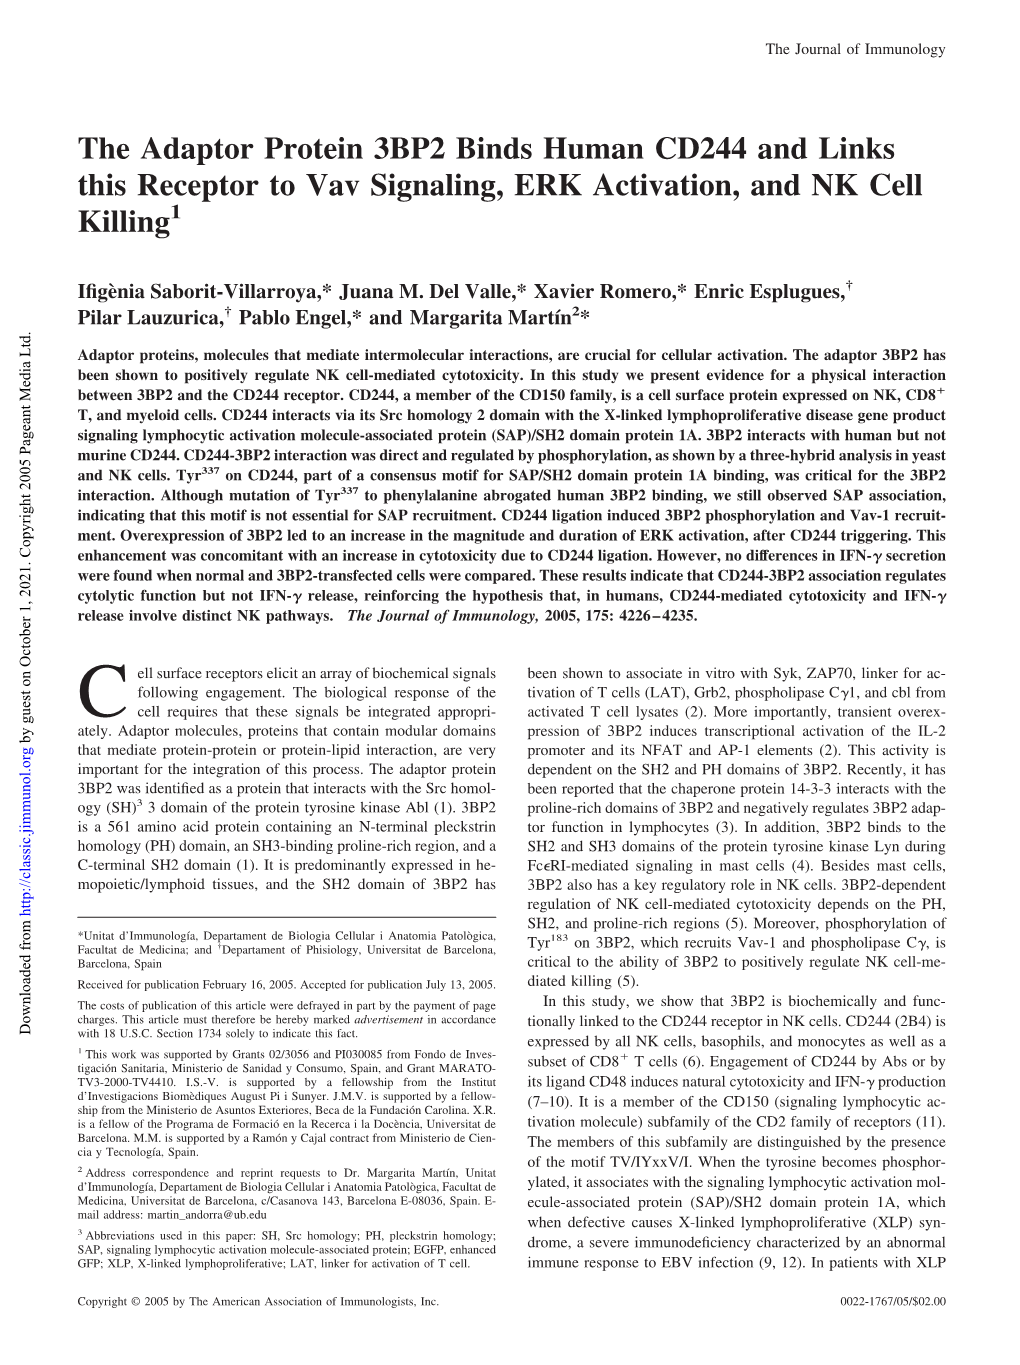 Killing Signaling, ERK Activation, and NK Cell CD244 and Links This